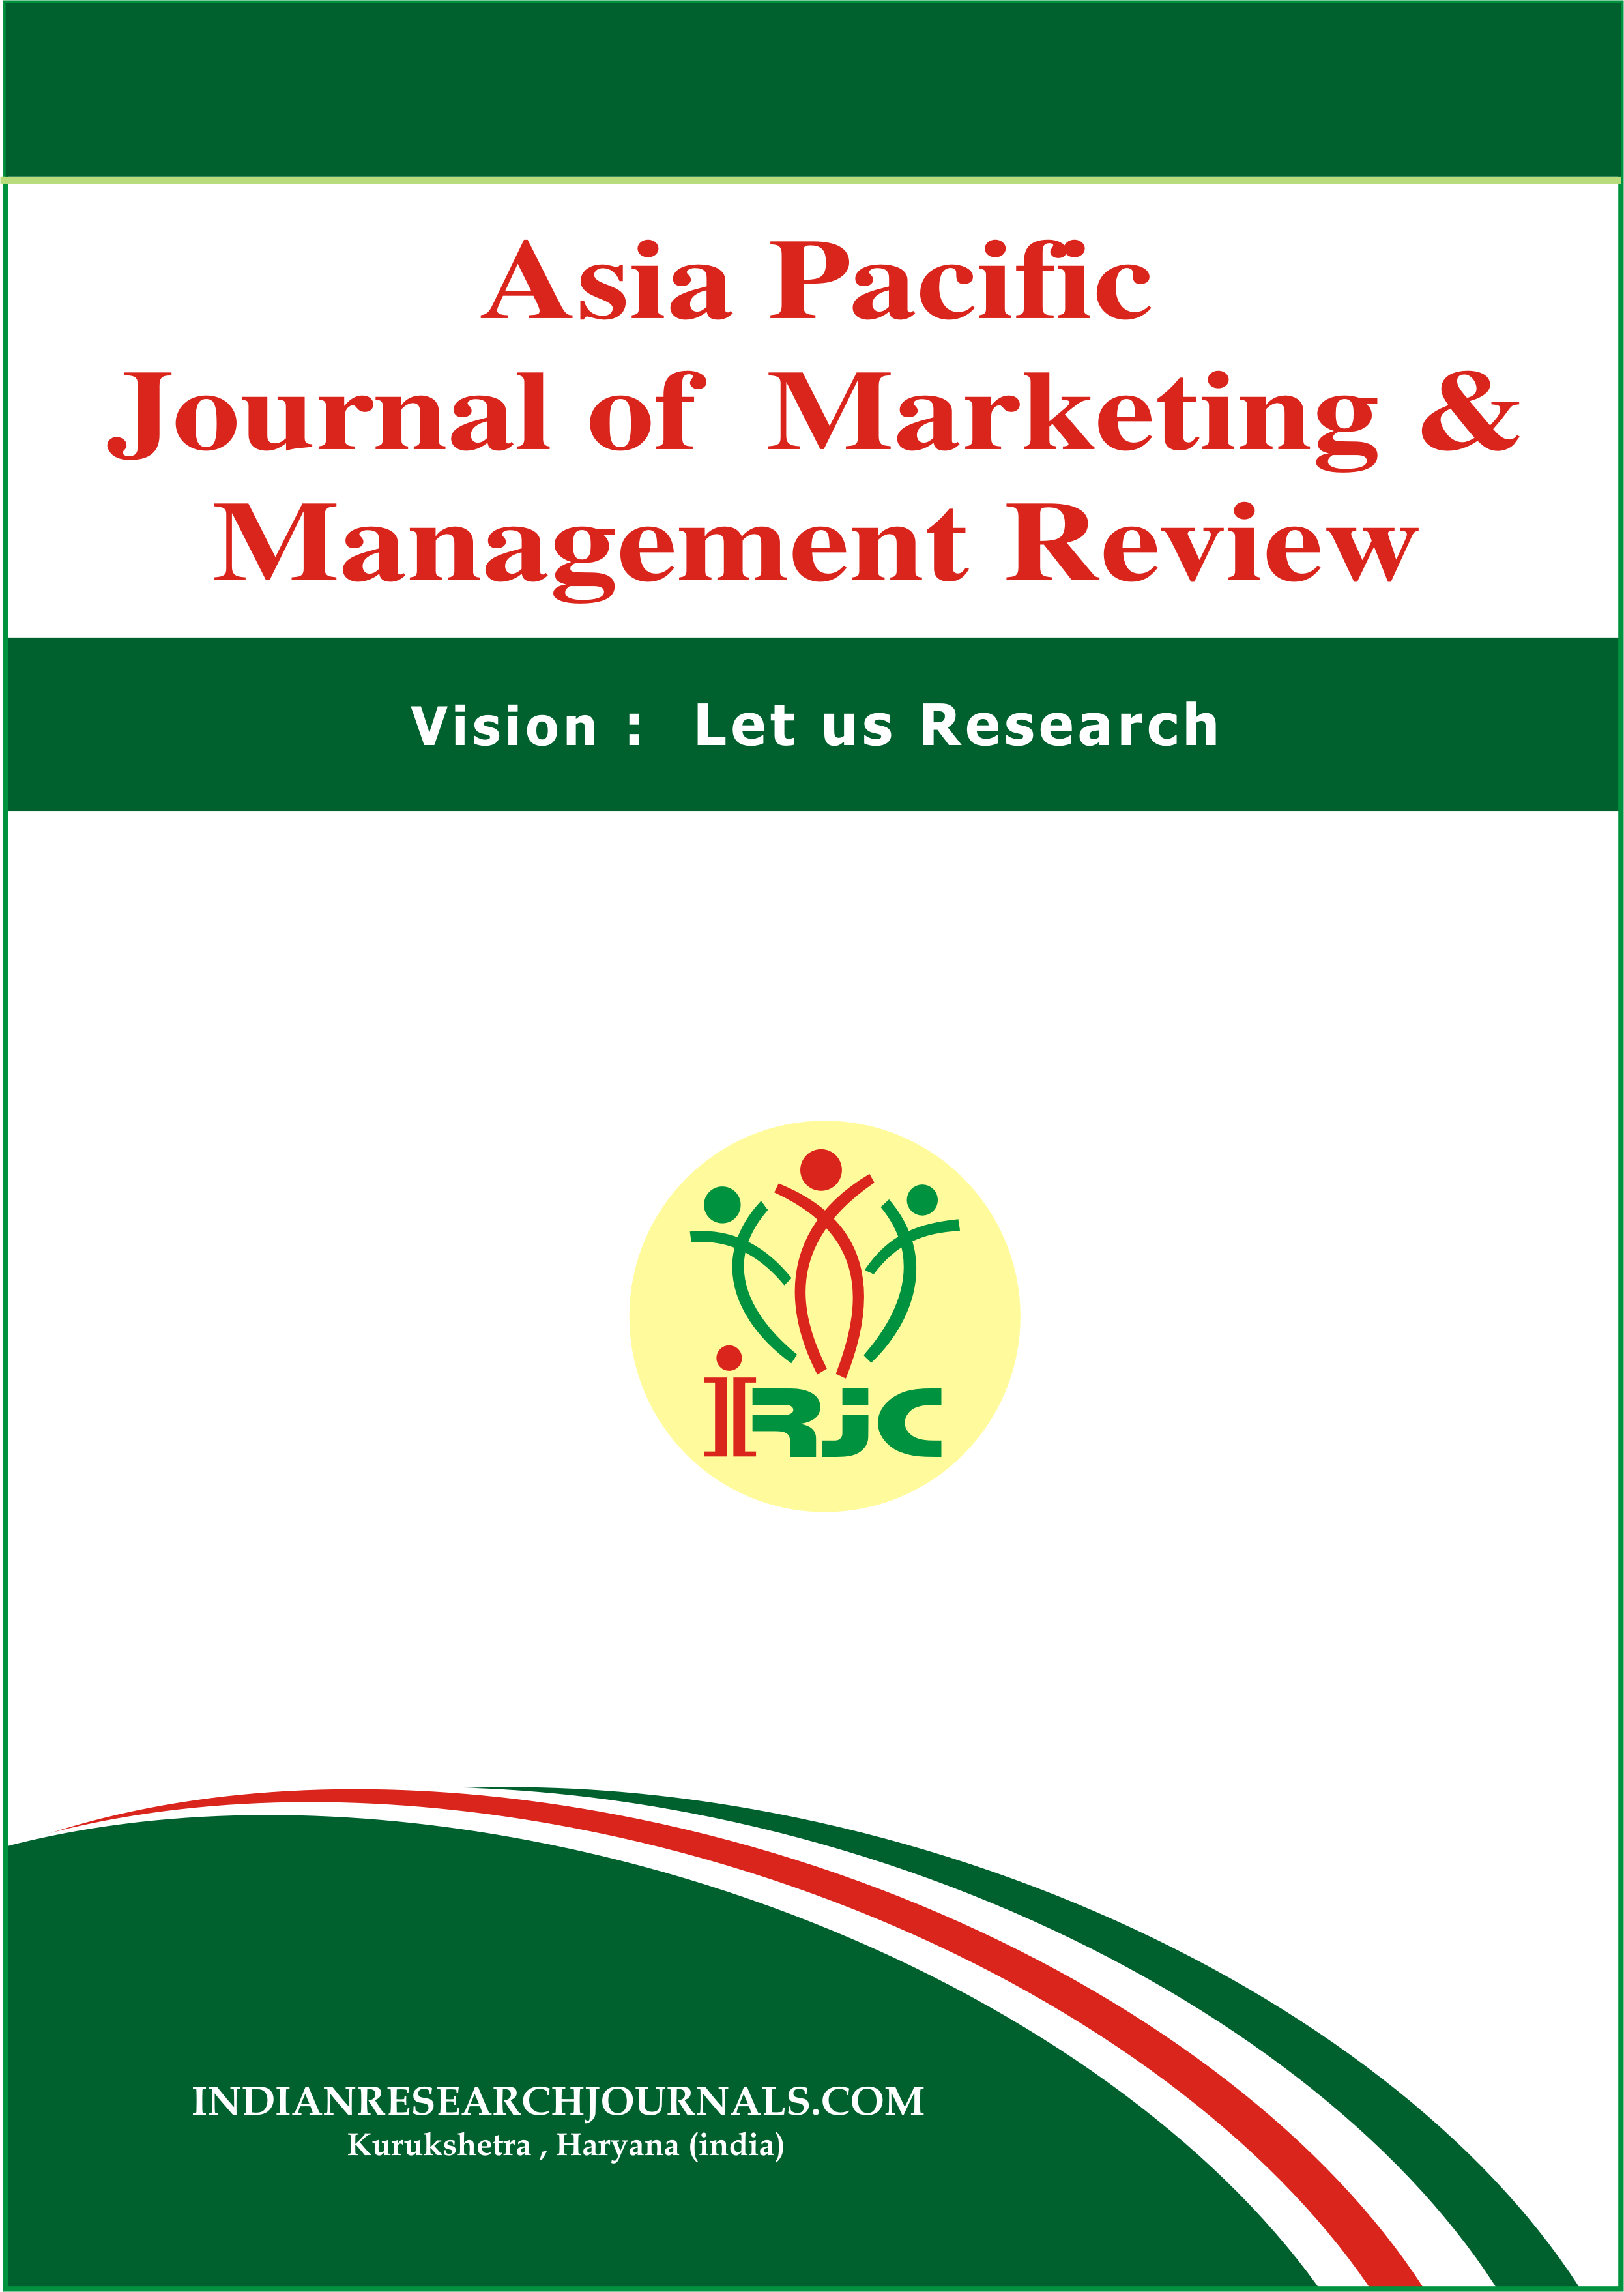 					View Vol. 11 No. 08 (2022): ASIA PACIFIC JOURNAL OF MARKETING & MANAGEMENT REVIEW
				